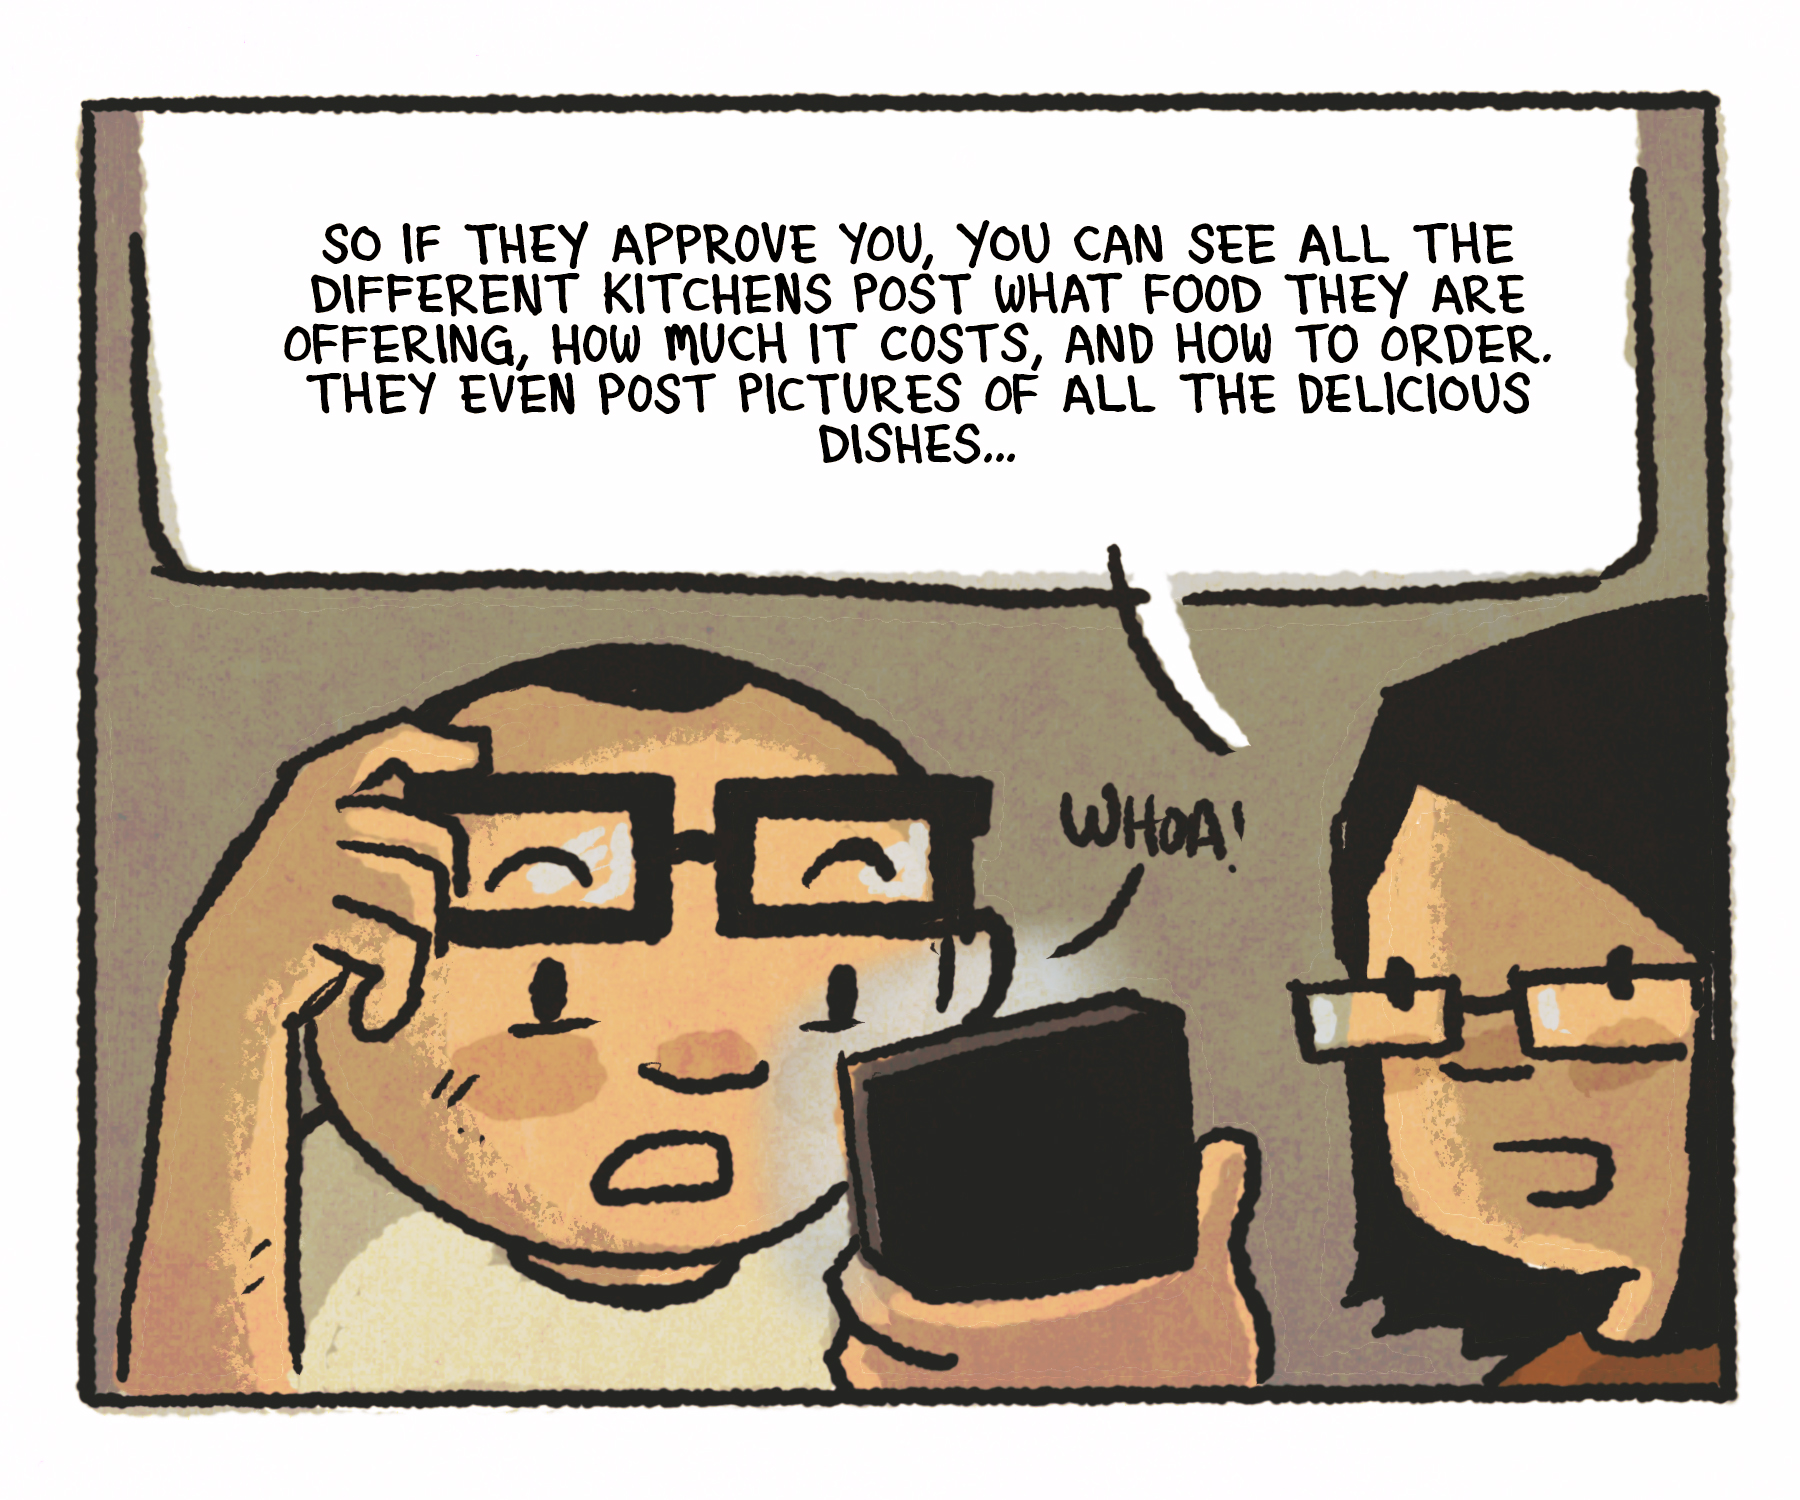 Comics panel: The man lifts up his glasses so that he can see his mother's phone more clearly. Speech bubble: "So if they approve you, you can see all the different kitchens post what food they are offering, how much it costs, and how to order. They even post pictures of all the delicious dishes..."